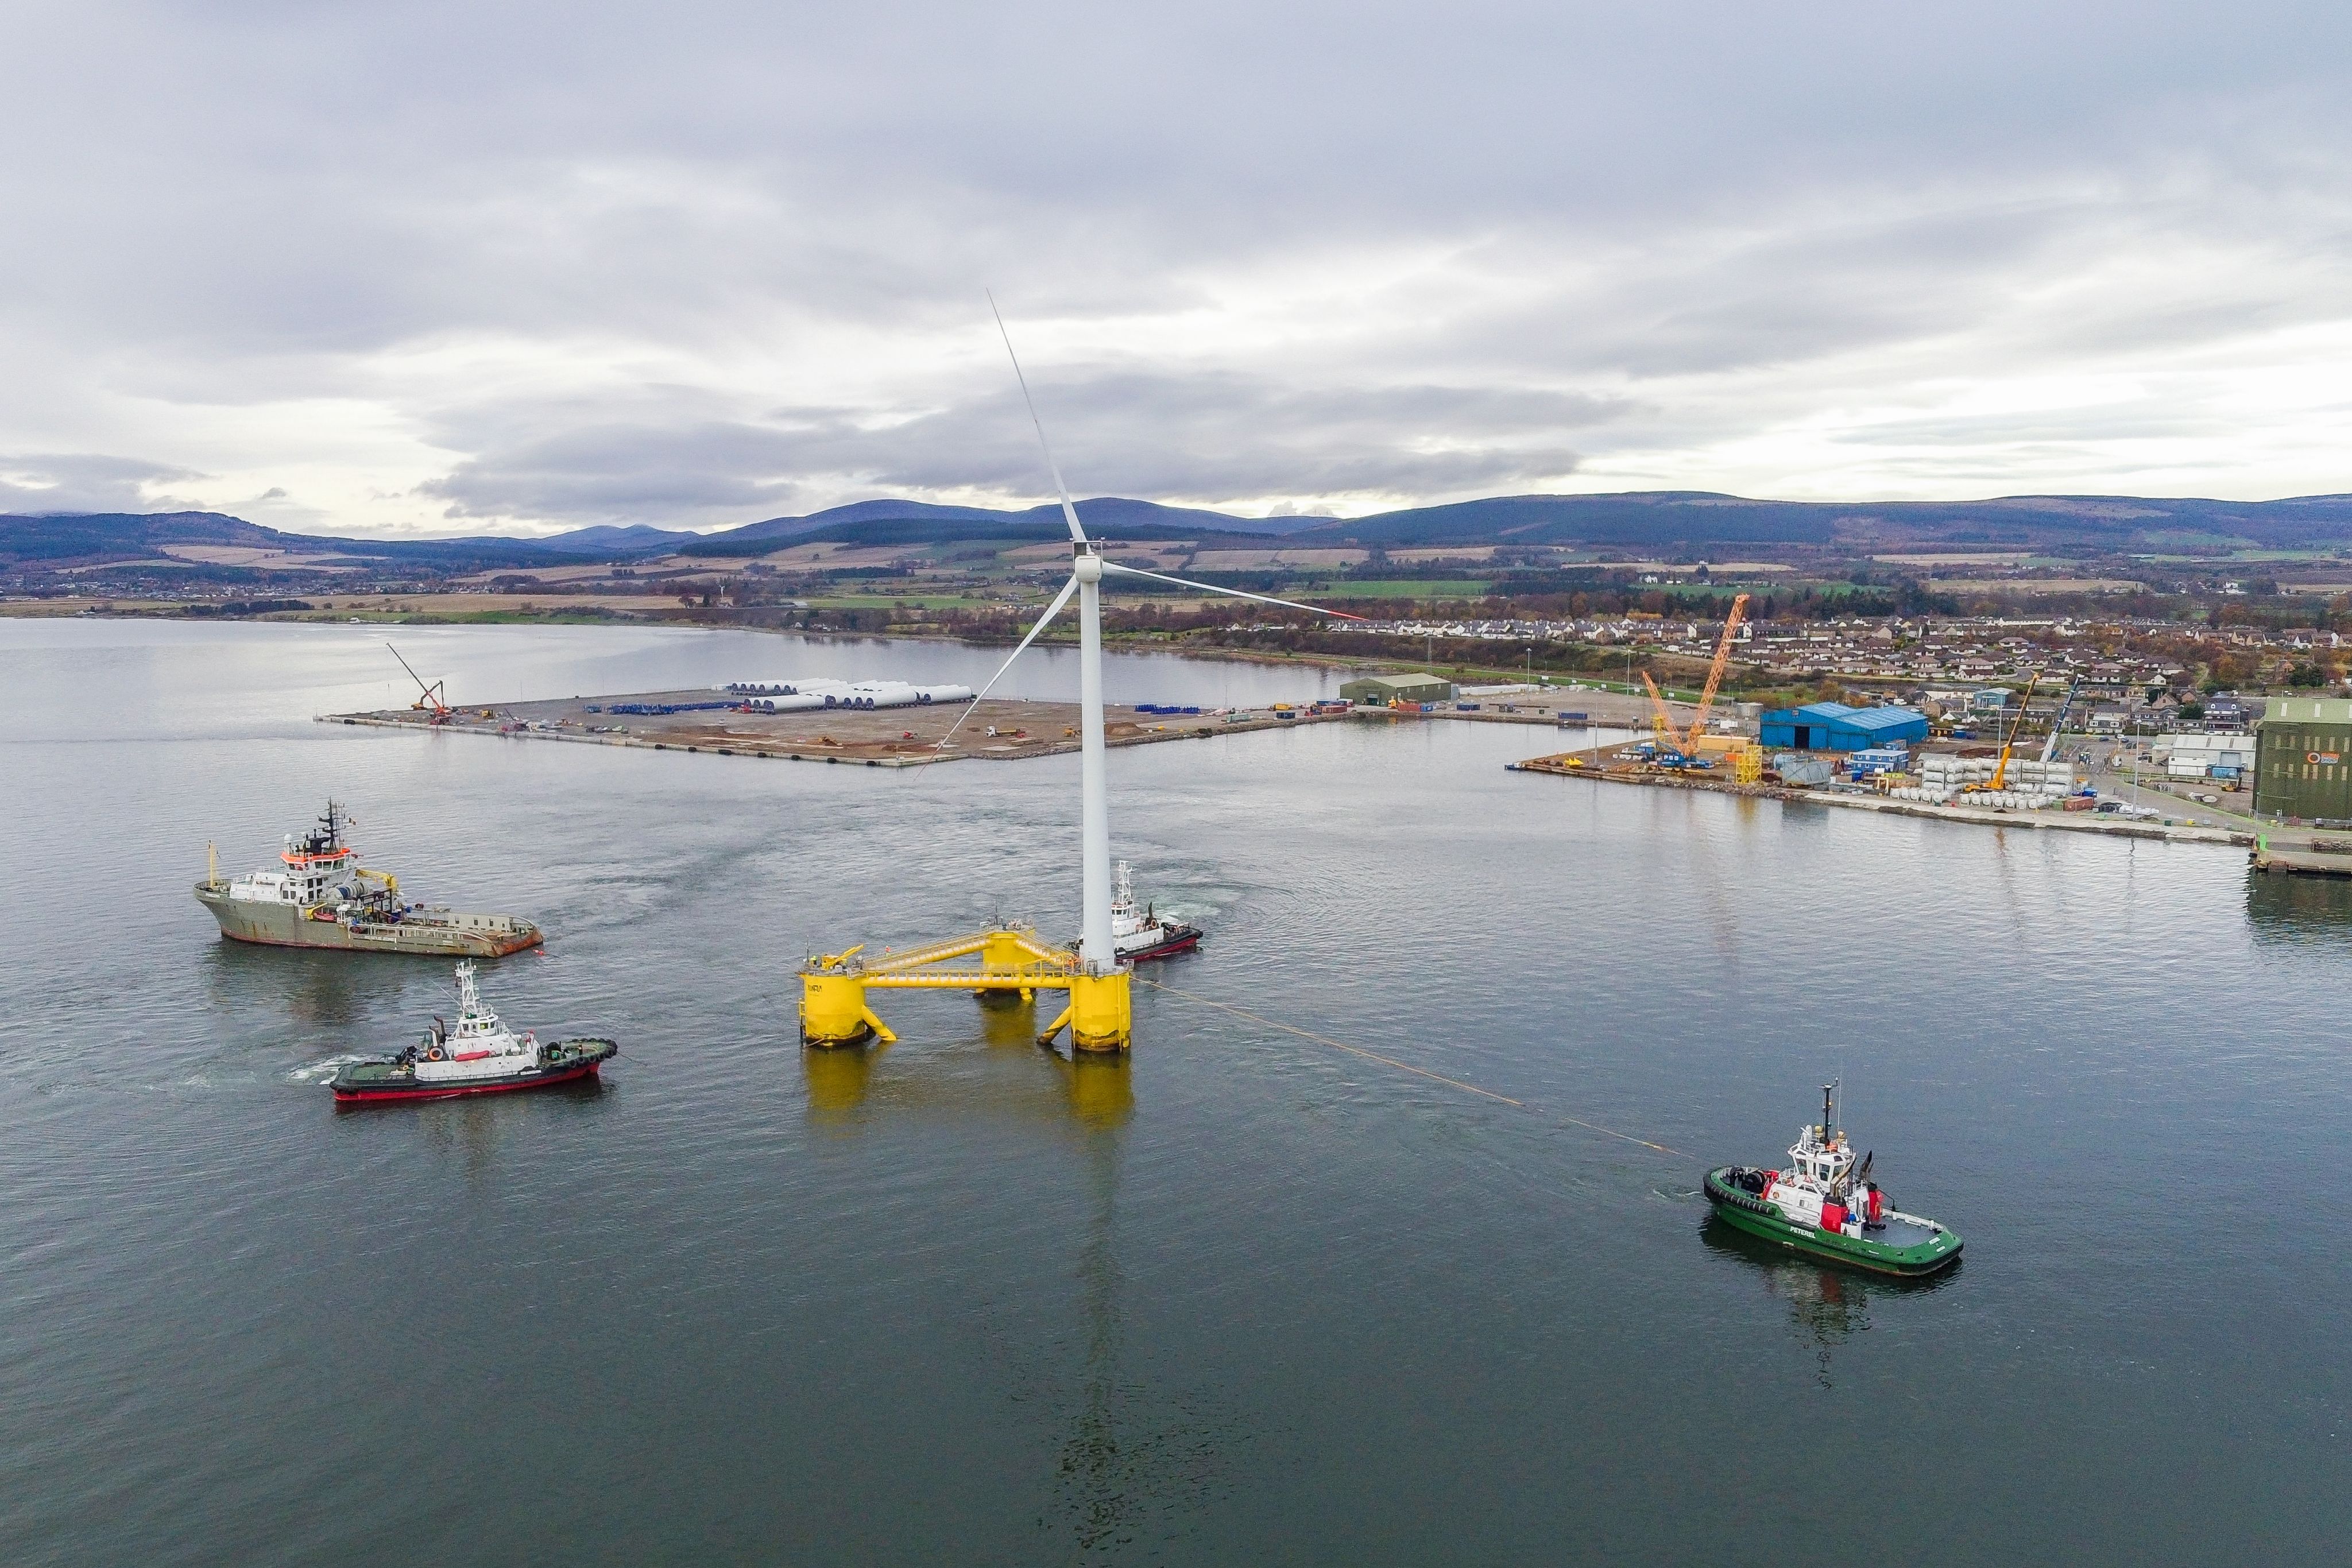 Photo showing offshore wind demonstration unit being towed out to sea at the port of Cromarty Firth.